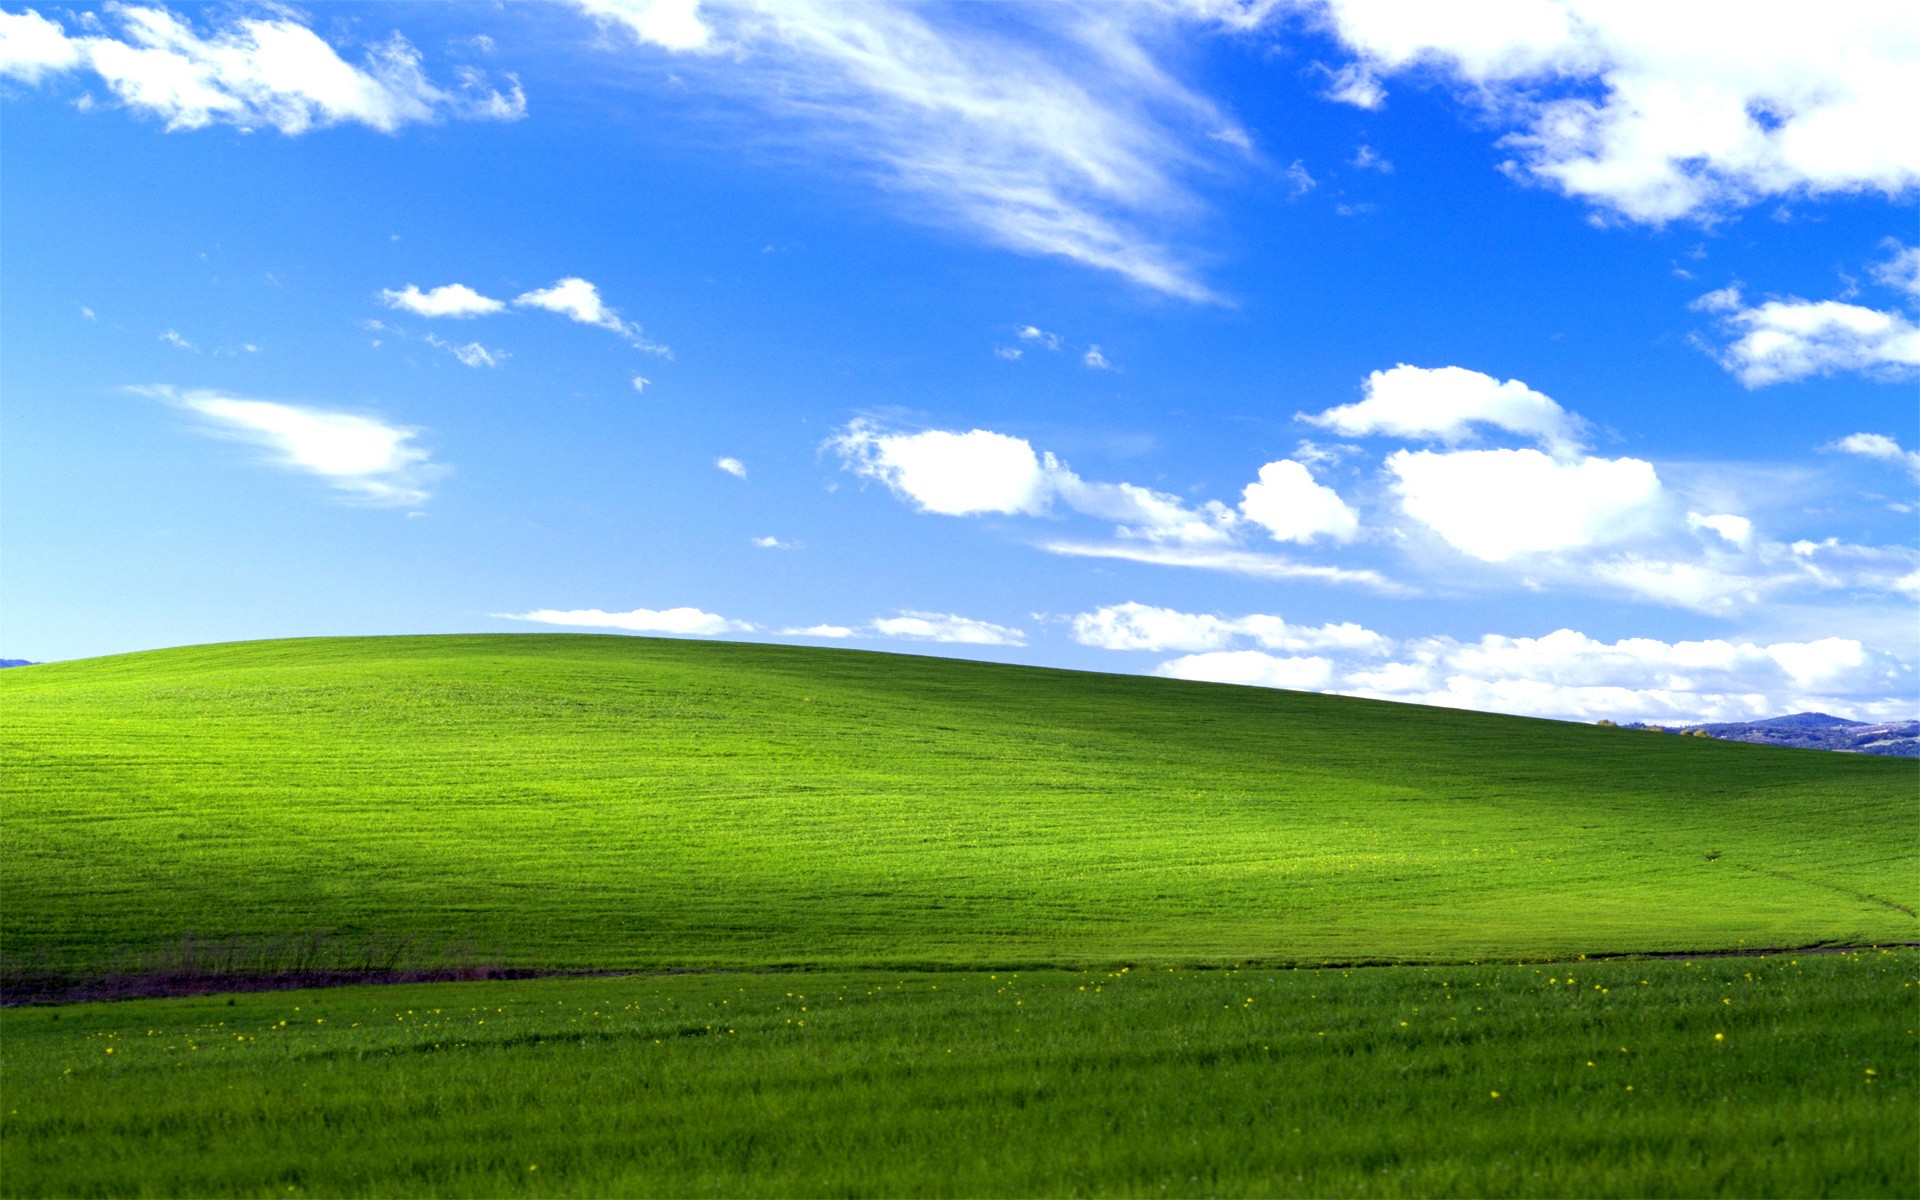 Did You Know The Windows Xp Wallpaper Was So Expensive Fedex